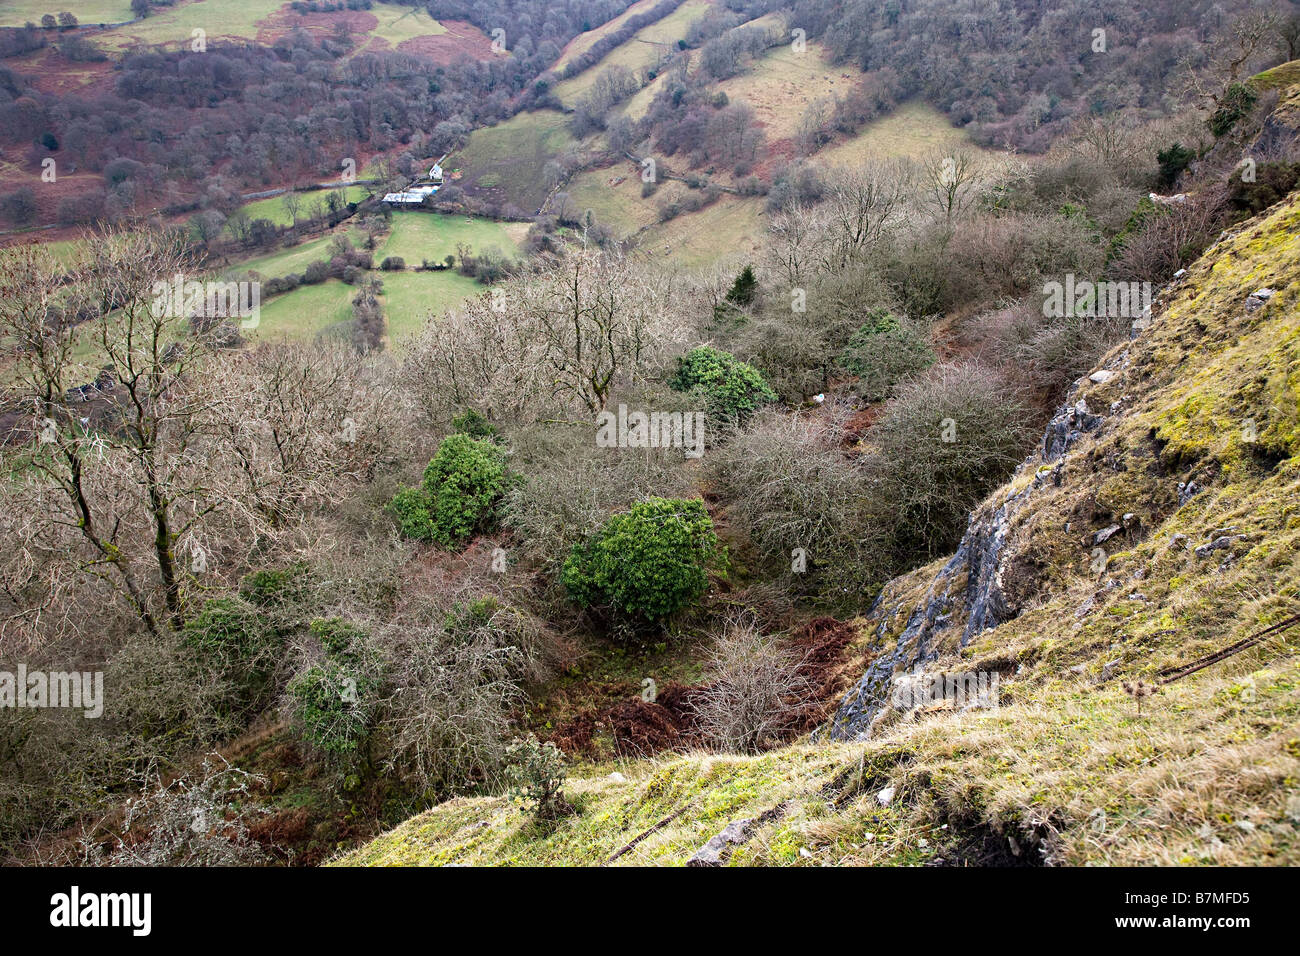 Hillside with farm fields and buildings in distance and a single sheep lost in trees Wales UK Stock Photo